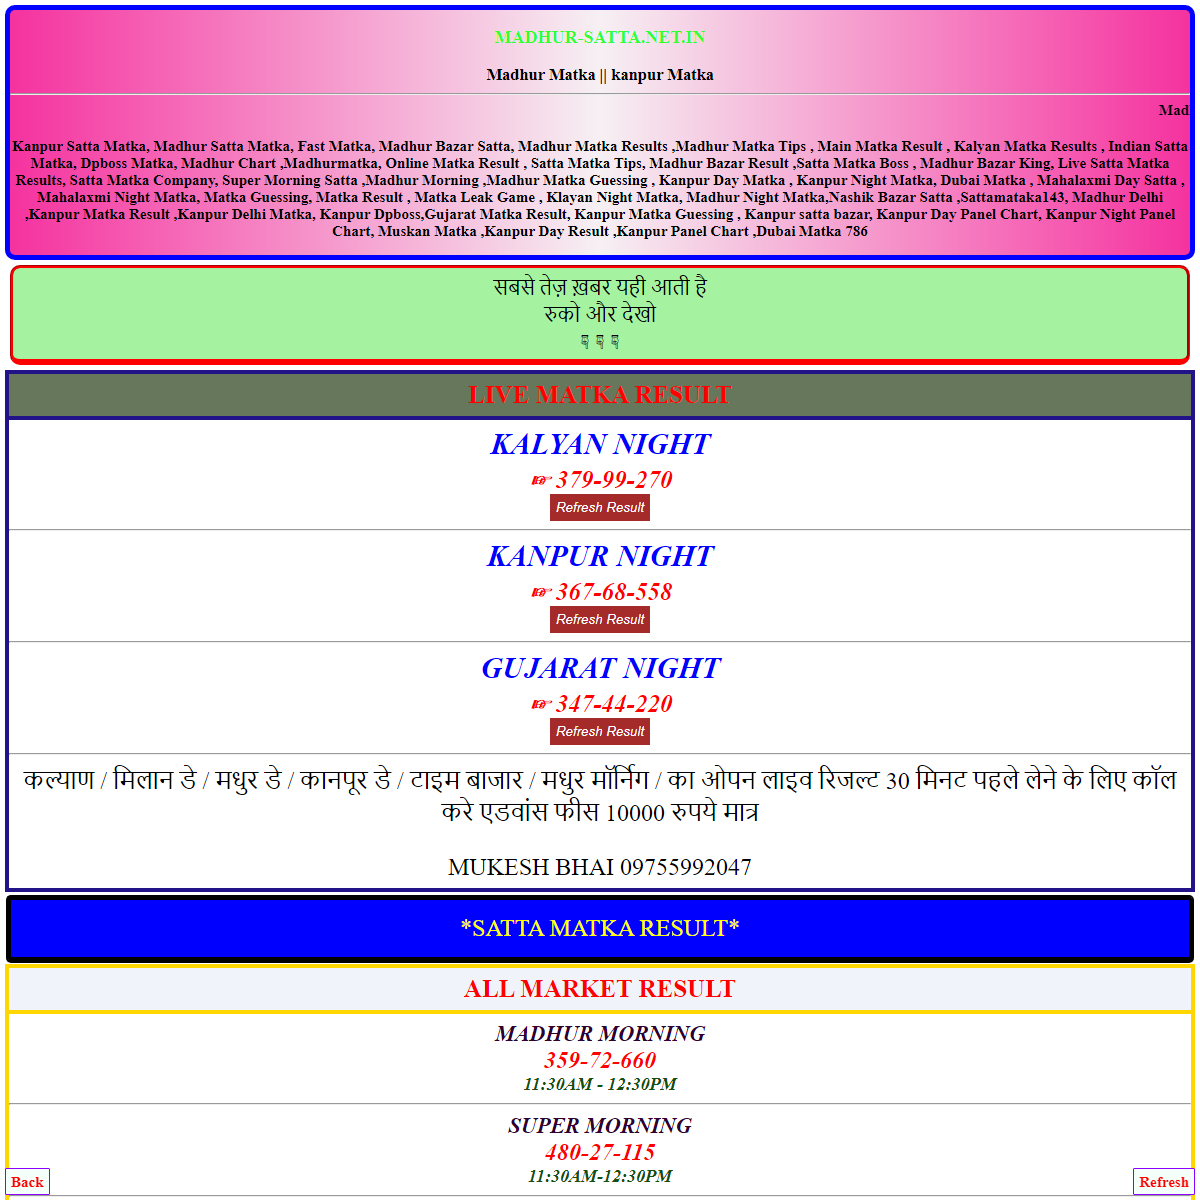 A complete backup of http://madhur-satta.net.in/